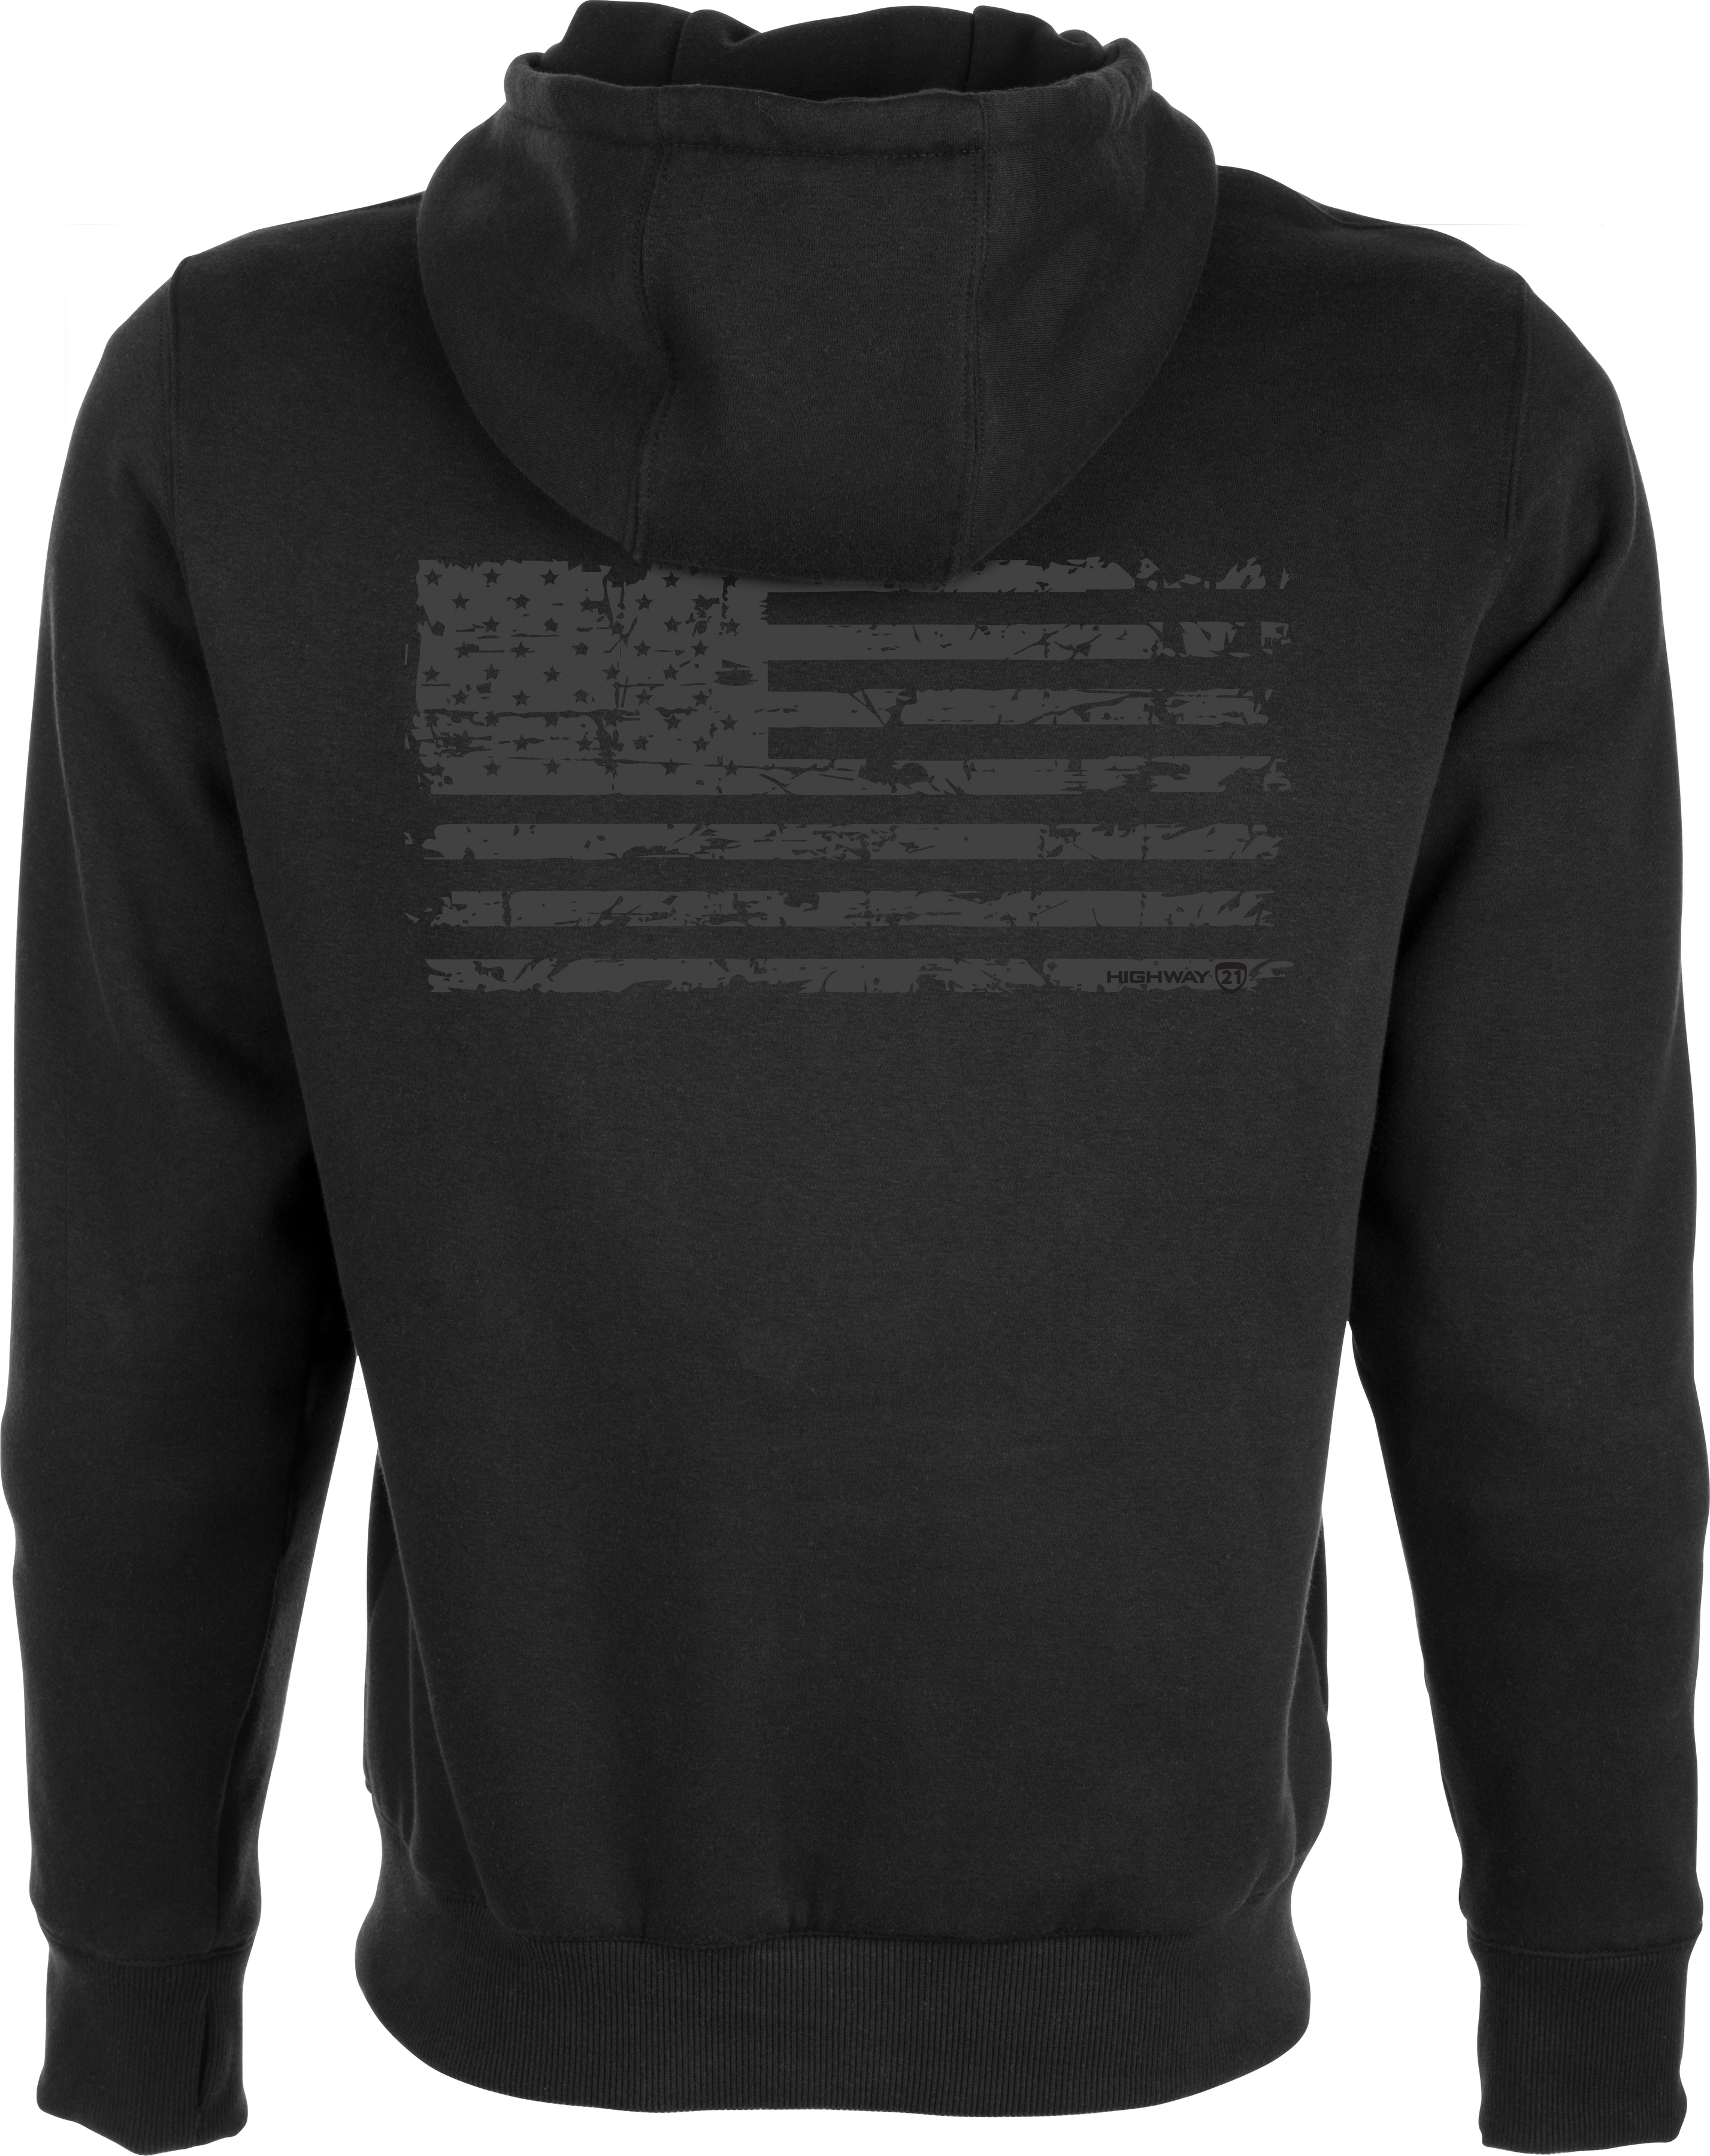 Industry Corporate Hoodie Black 2X-Large - Click Image to Close